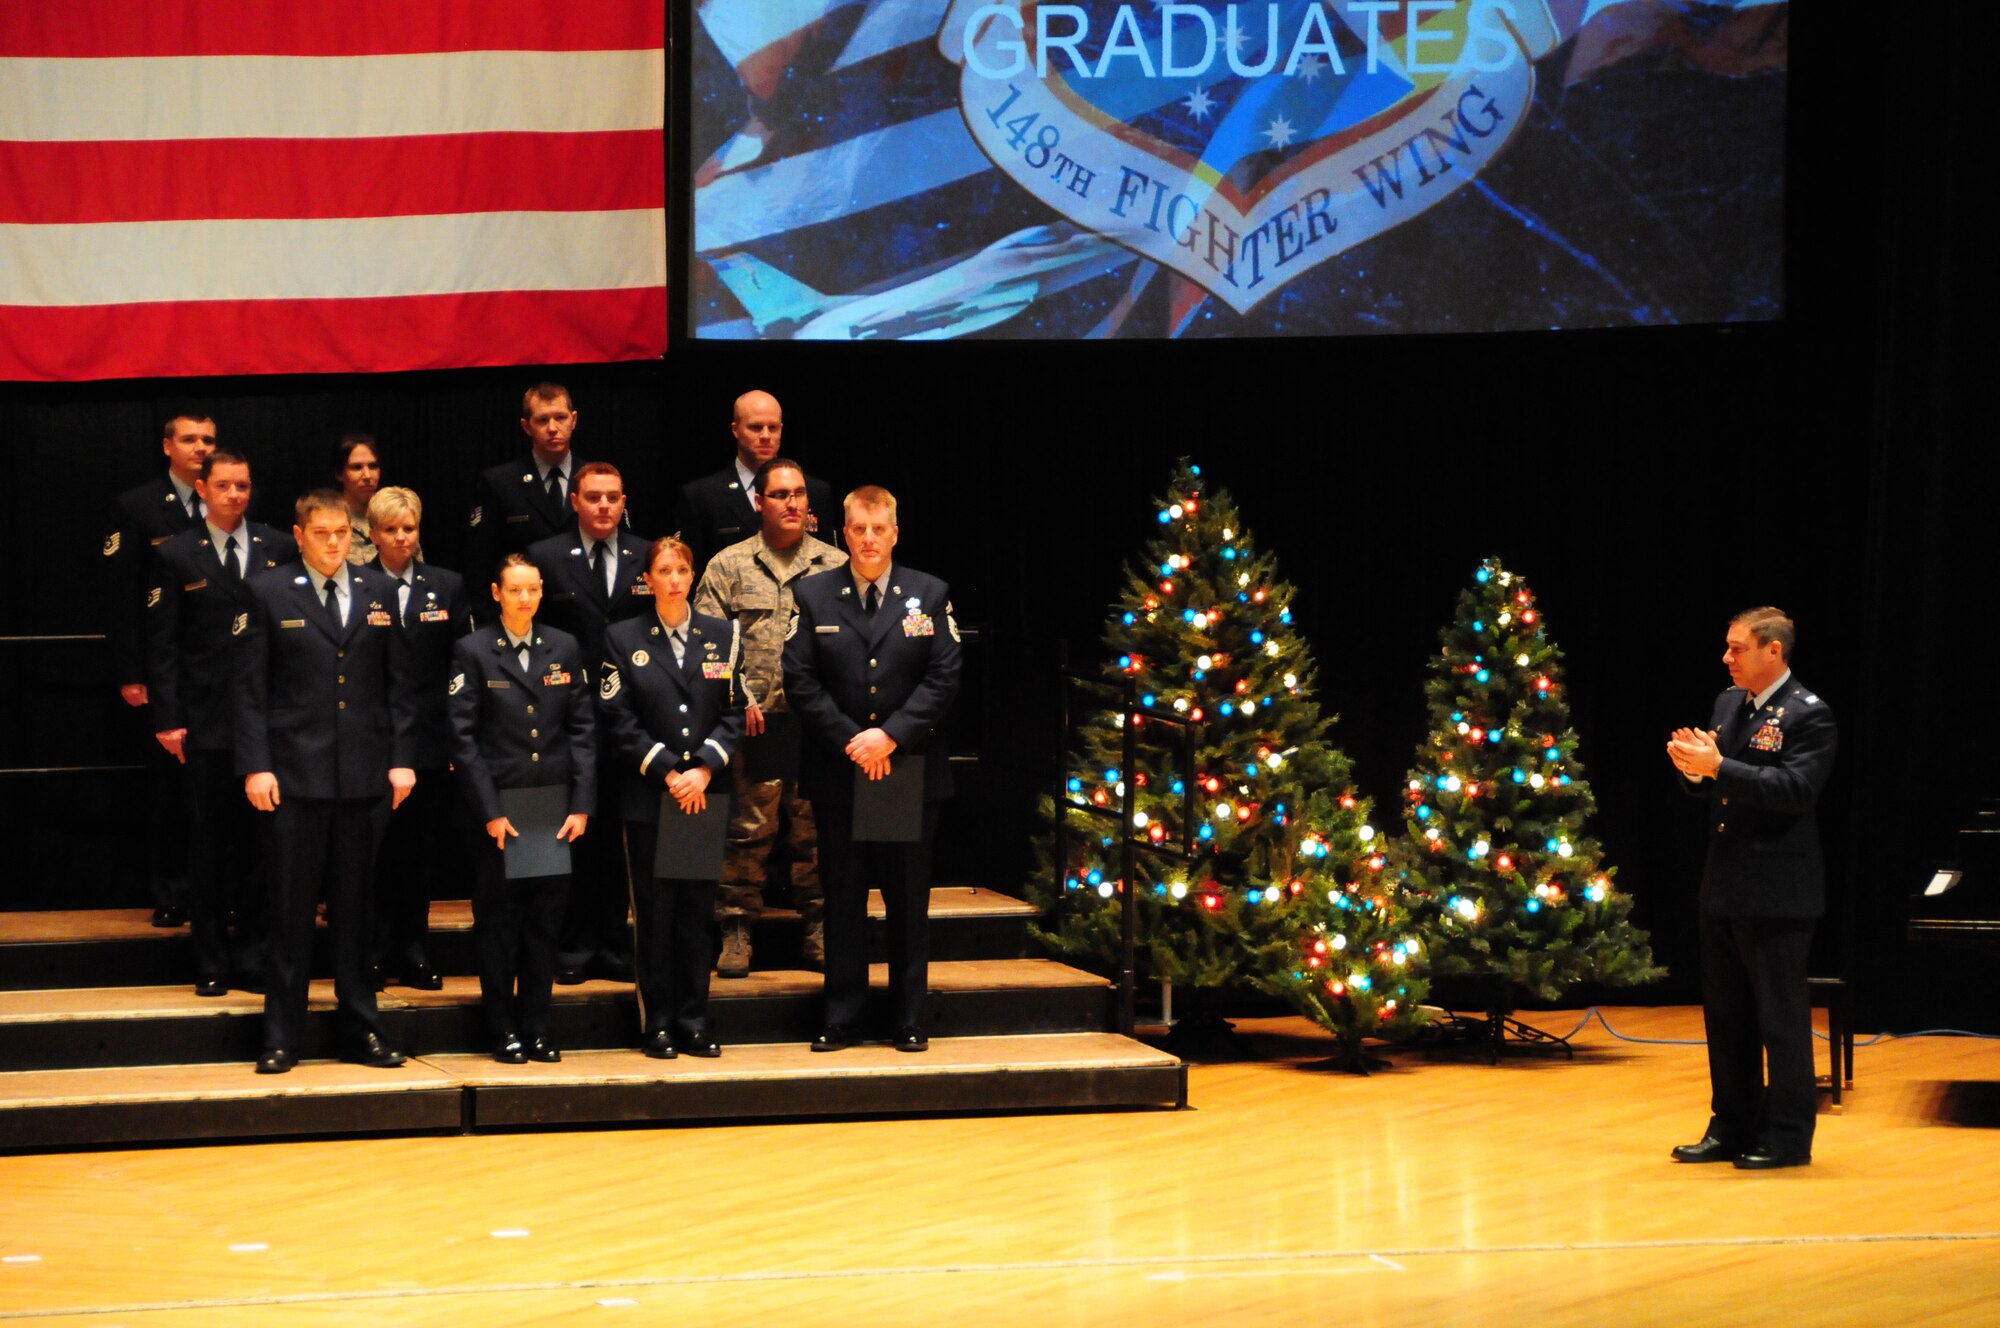 148th Fighter Wing Community College of the Air Force graduates stand during the 2011 award and retirement ceremony at the Duluth Entertainment Convention Center Dec. 4, 2011.  From 2010 to 2011, CCAF graduates have increased 59%. That number is expected to increase for the 148th again in the 2012 graduating classes.  (National Guard photo by Senior Airman Sarah Hayes.)